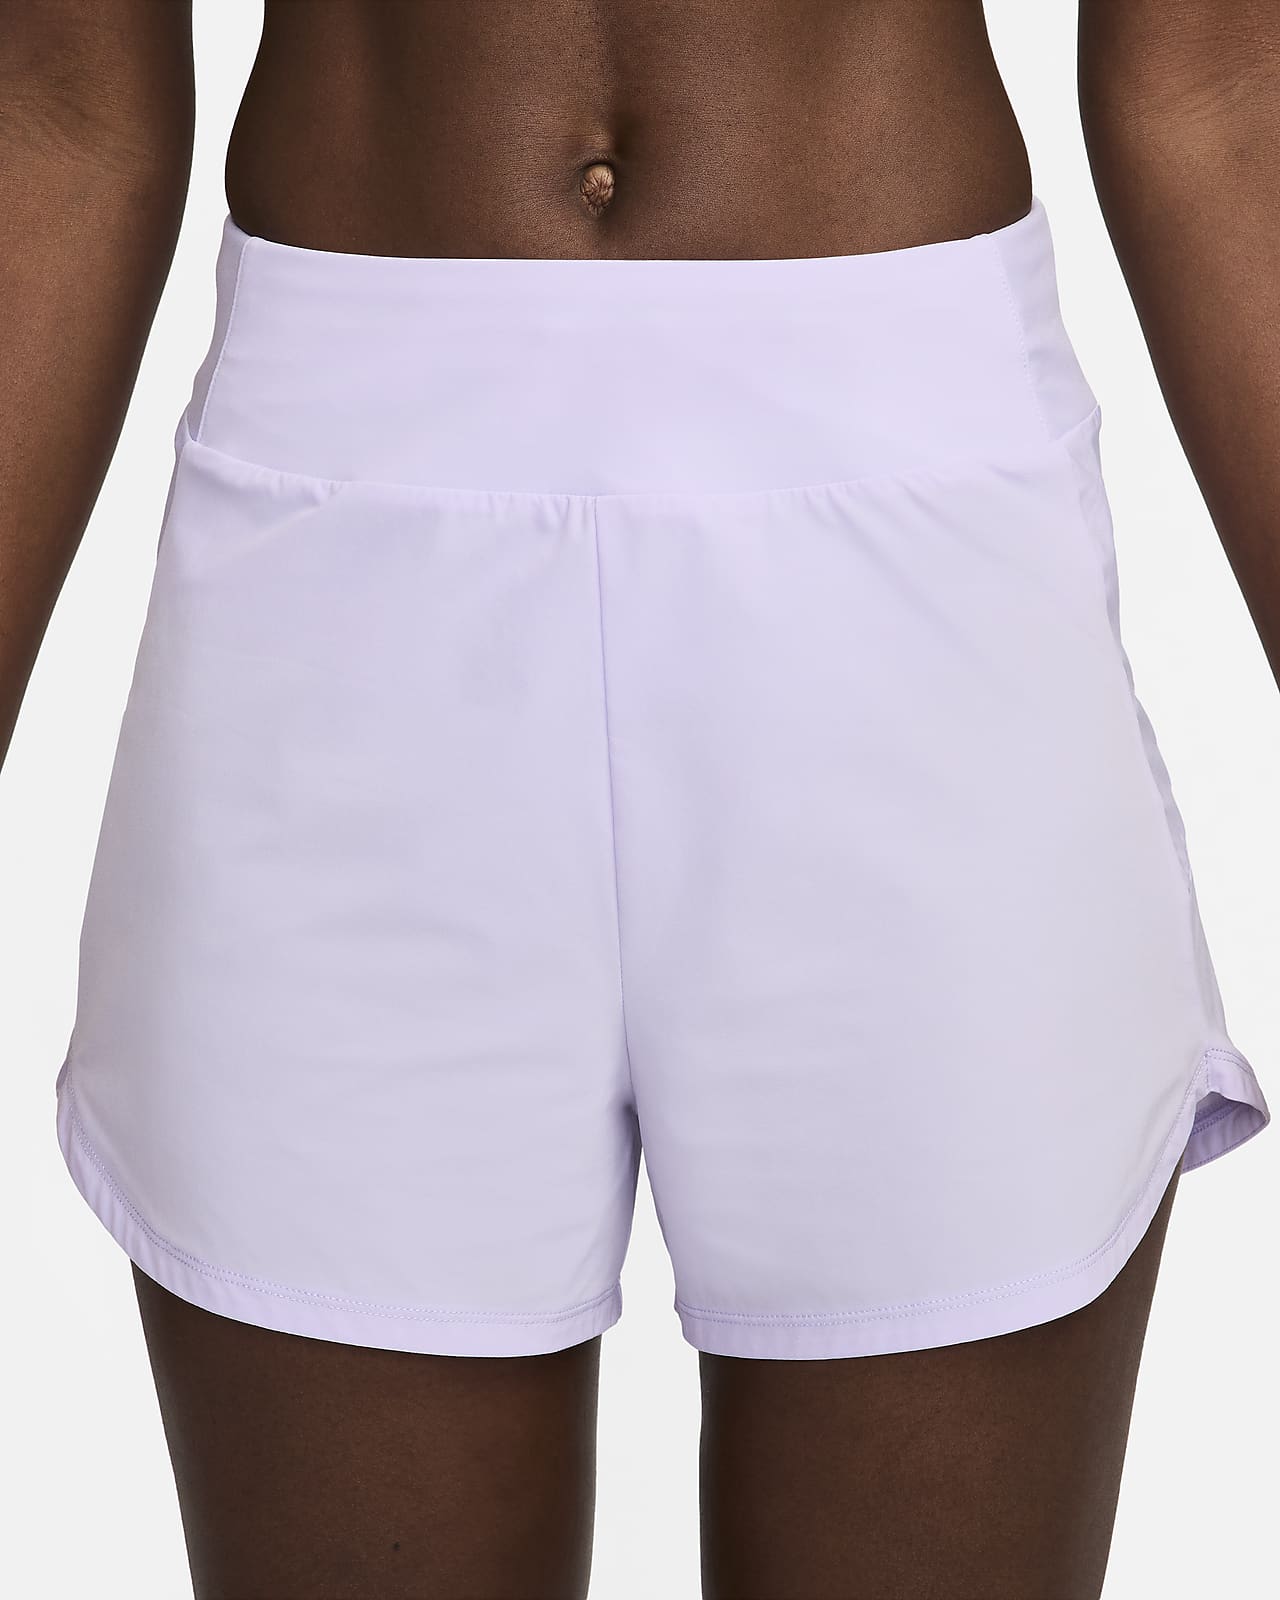 Nike Bliss Women's Dri-FIT Fitness High-Waisted 3 Brief-Lined Shorts.